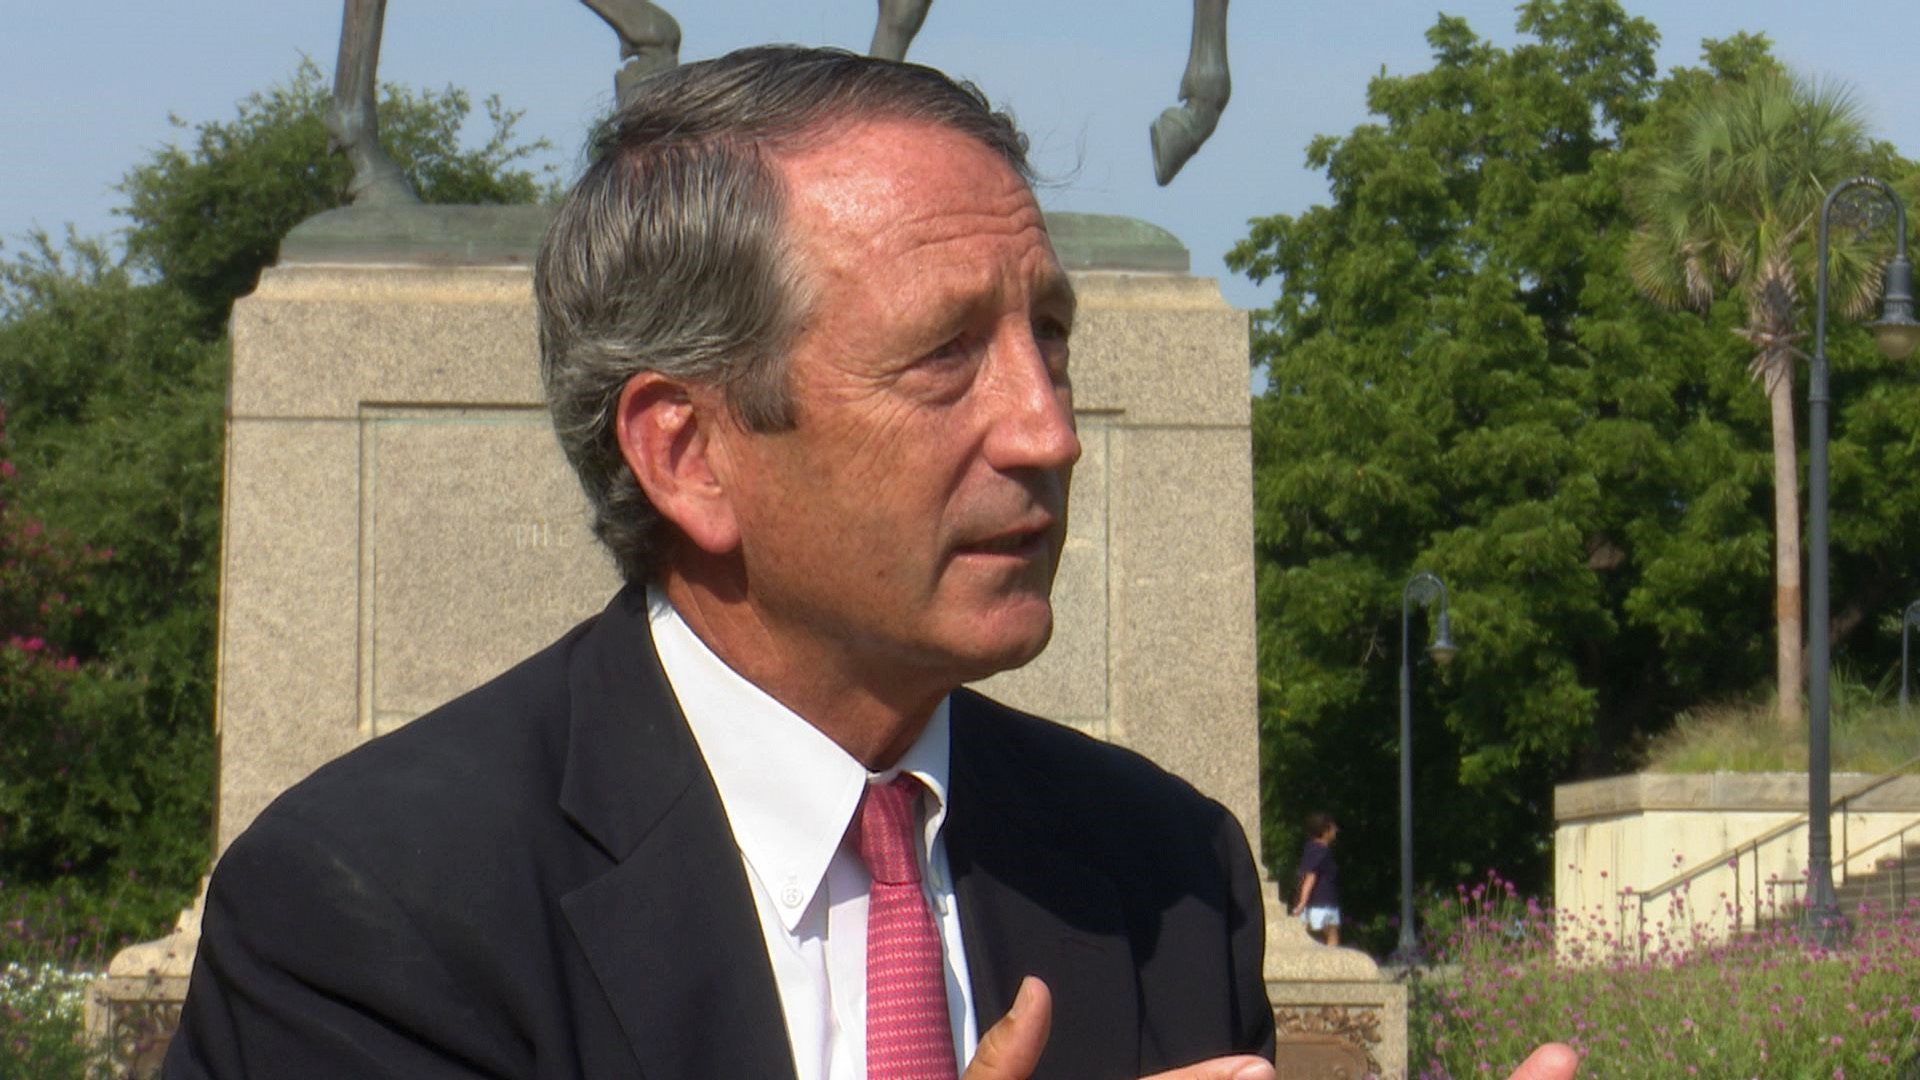 Former South Carolina Gov. Mark Sanford says he's about two weeks away from deciding if he'll seek the Republican nomination and challenge President. Donald Trump. Sanford says America's lost its way on fiscal responsibility.